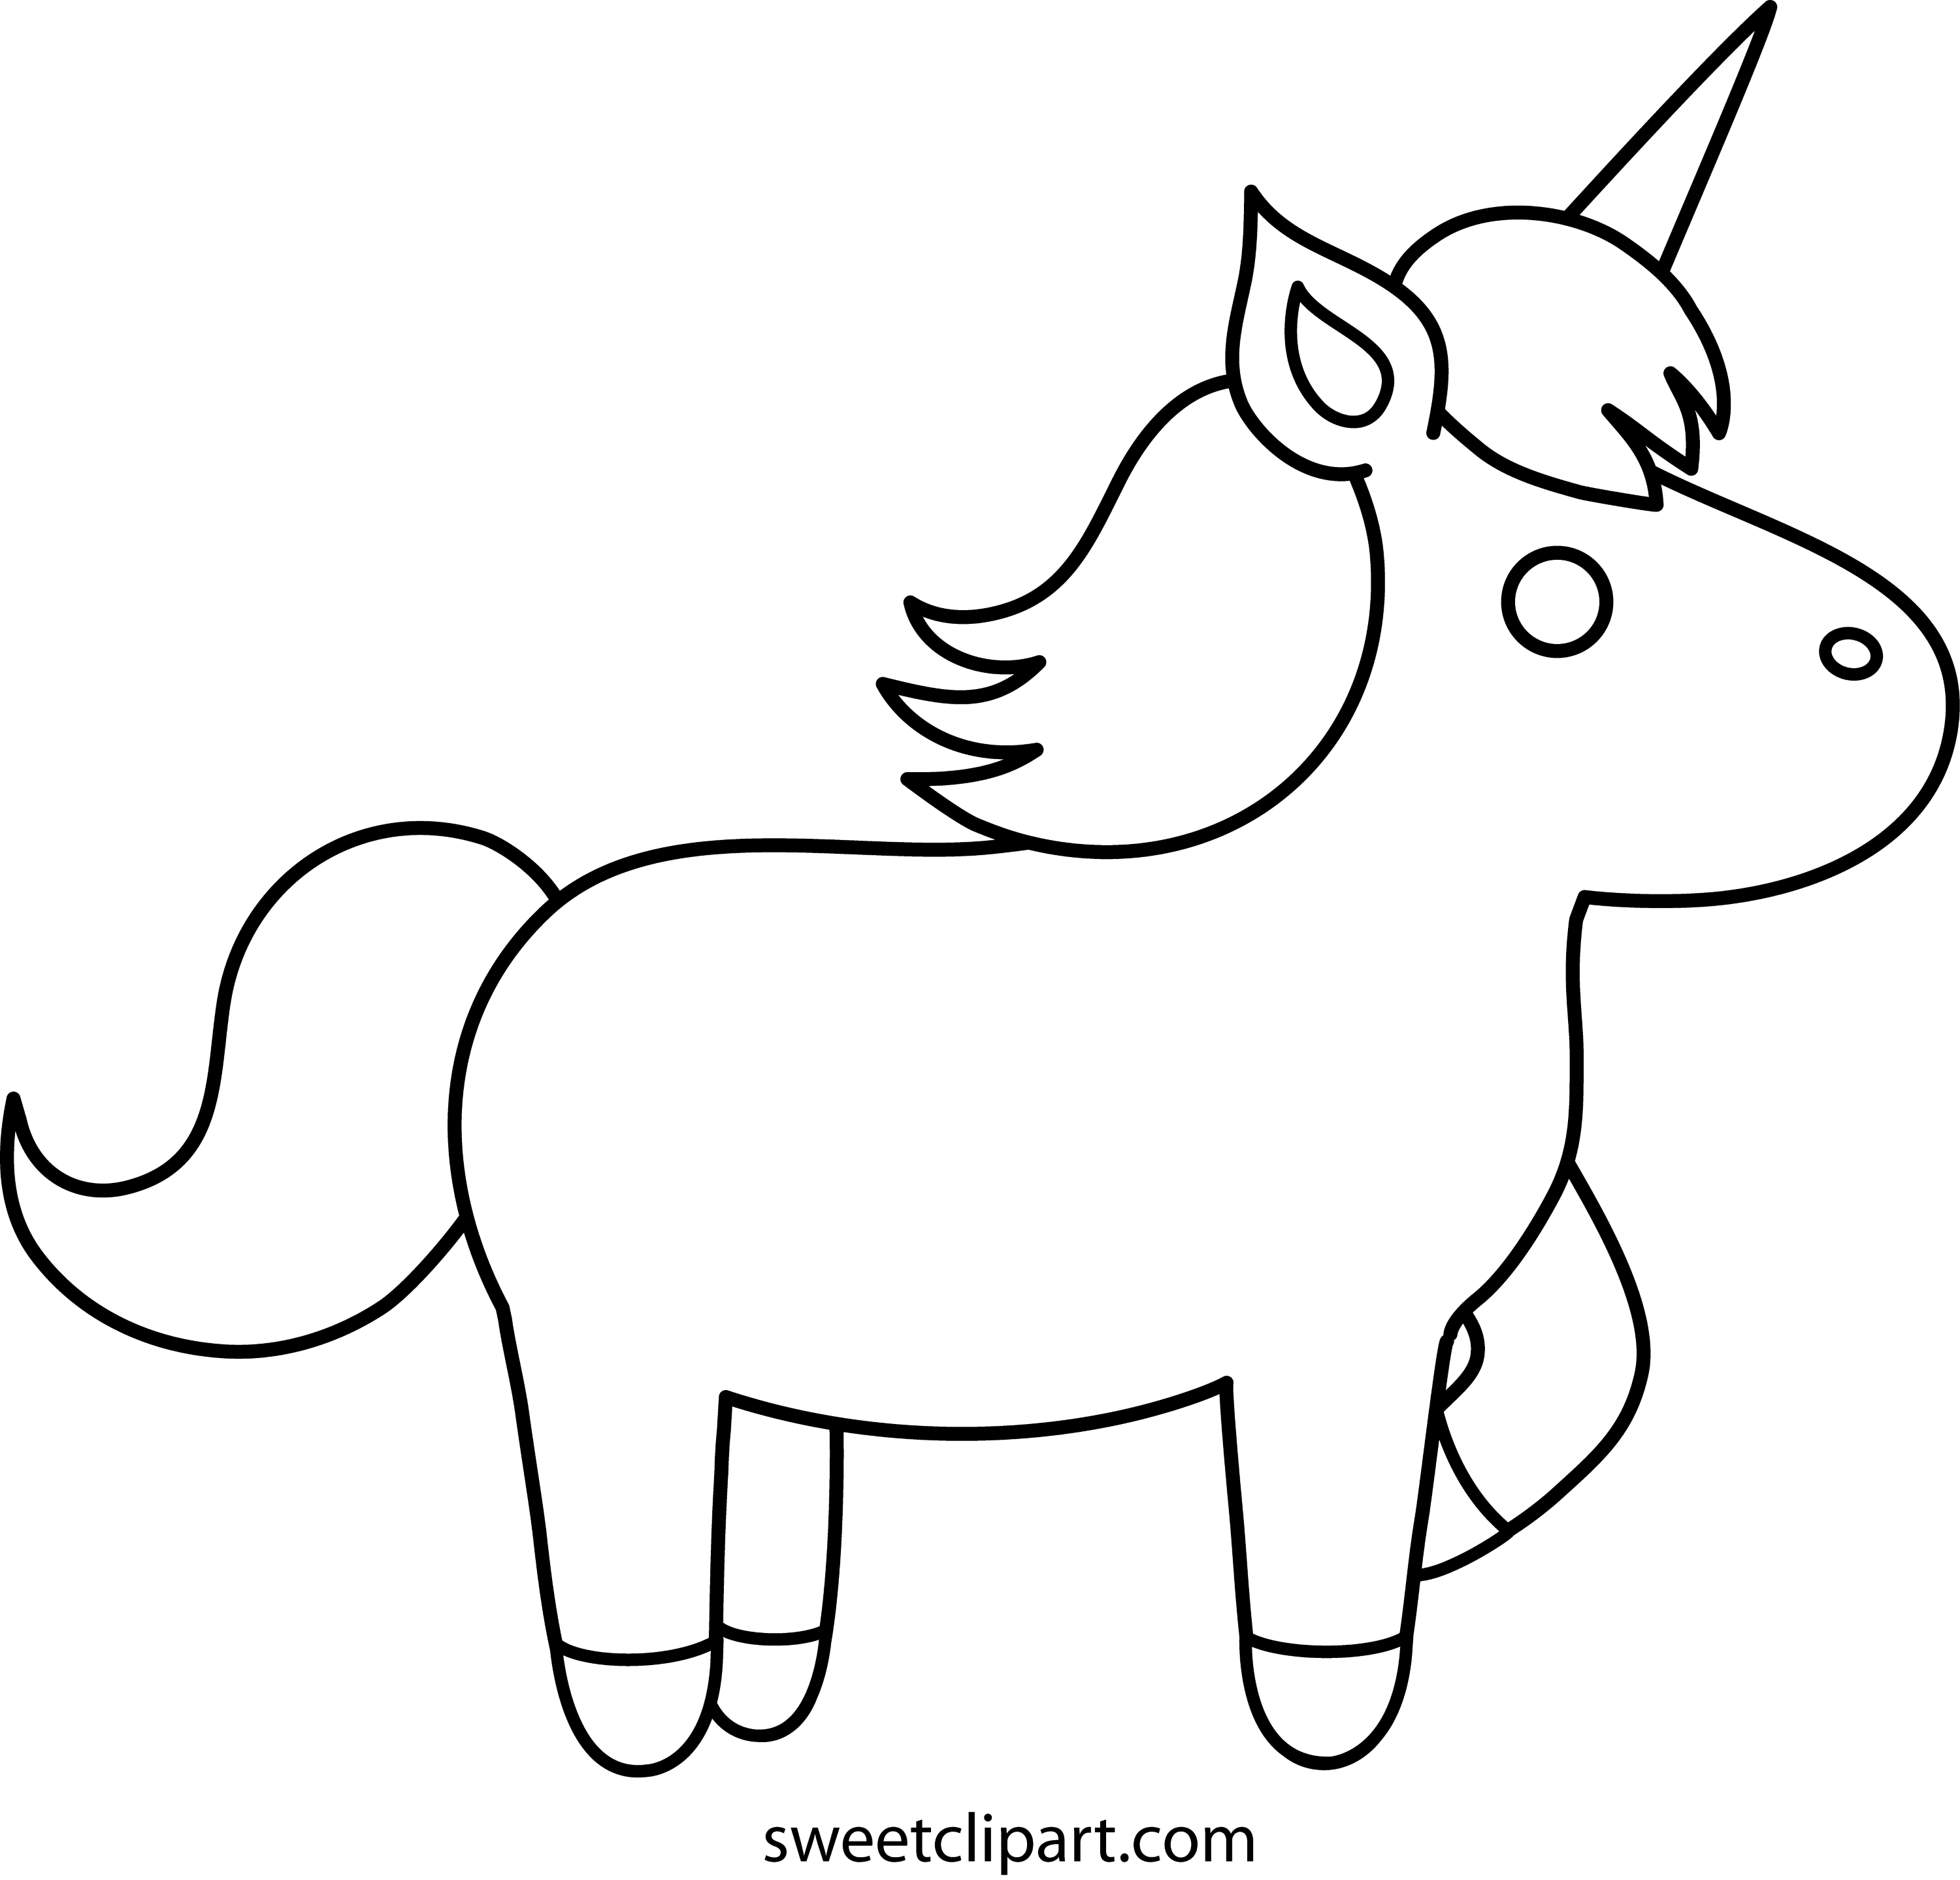 unicorn coloring pages cartoon - photo #35